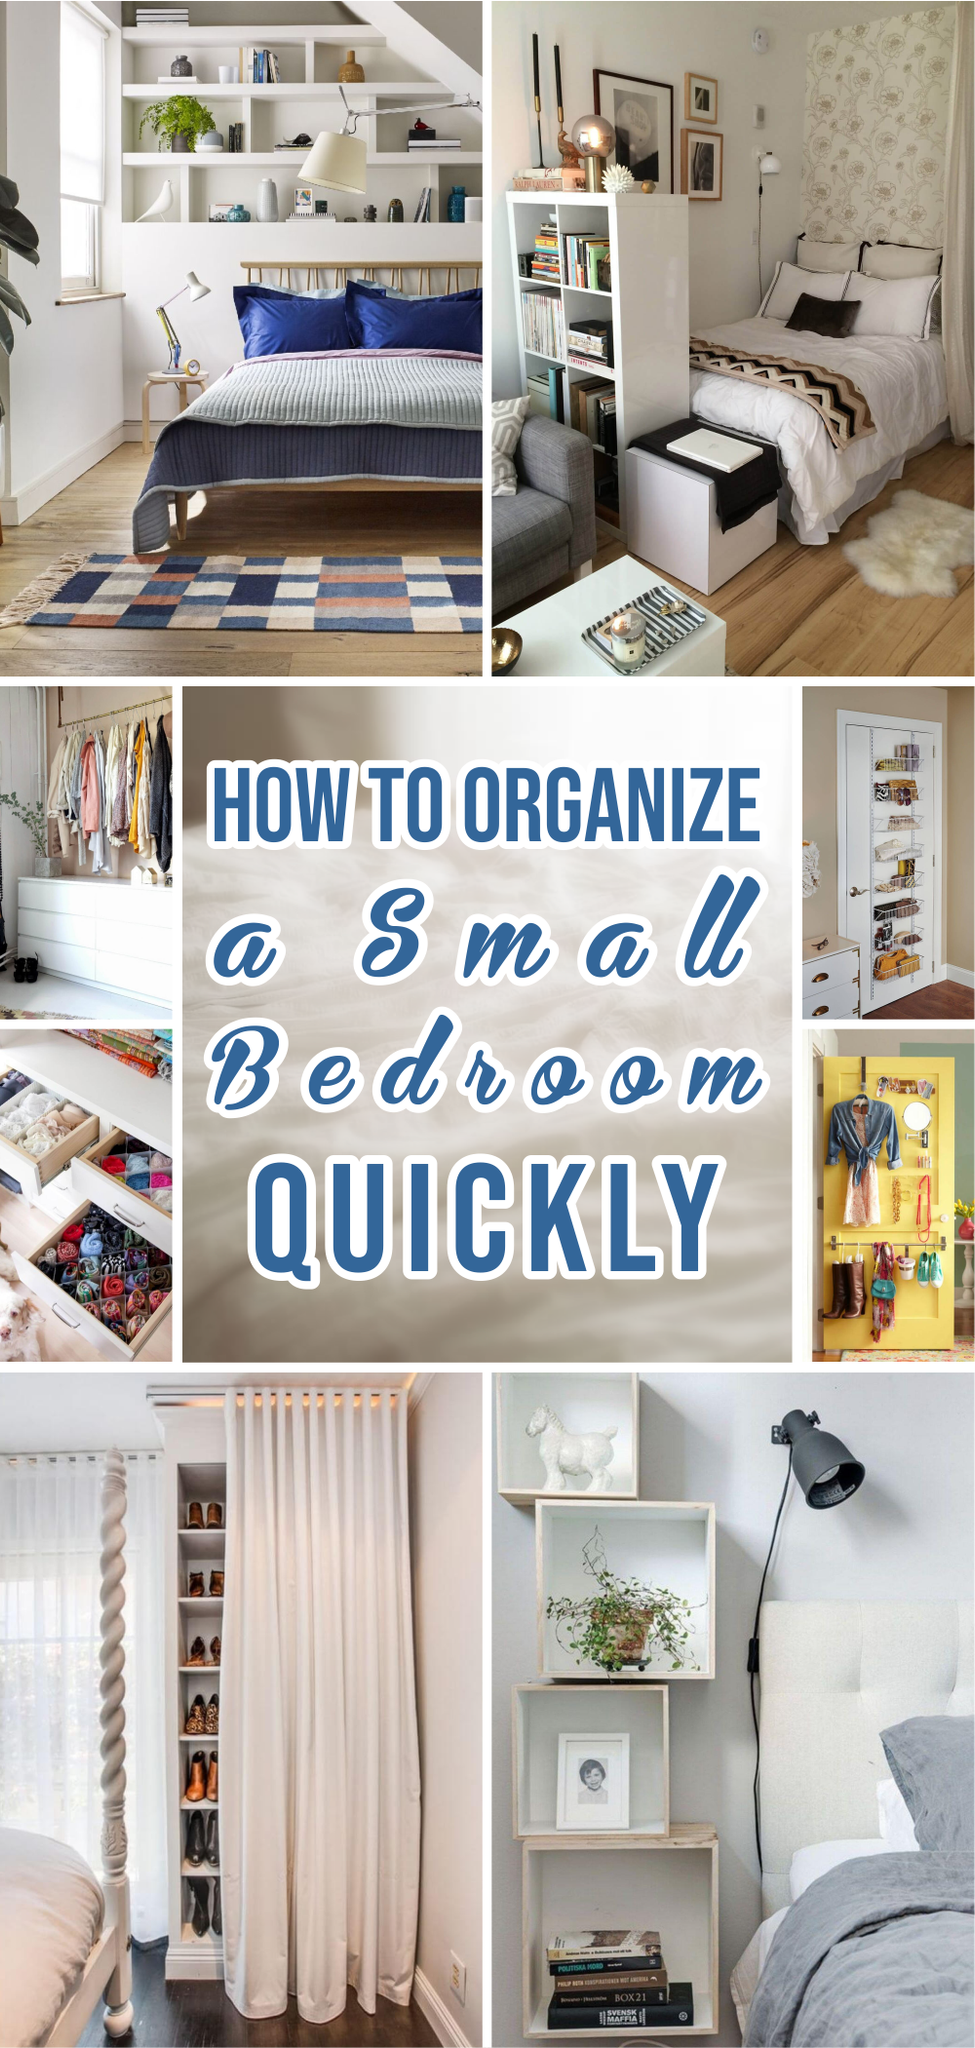 How to Organize a Small Bedroom Quickly